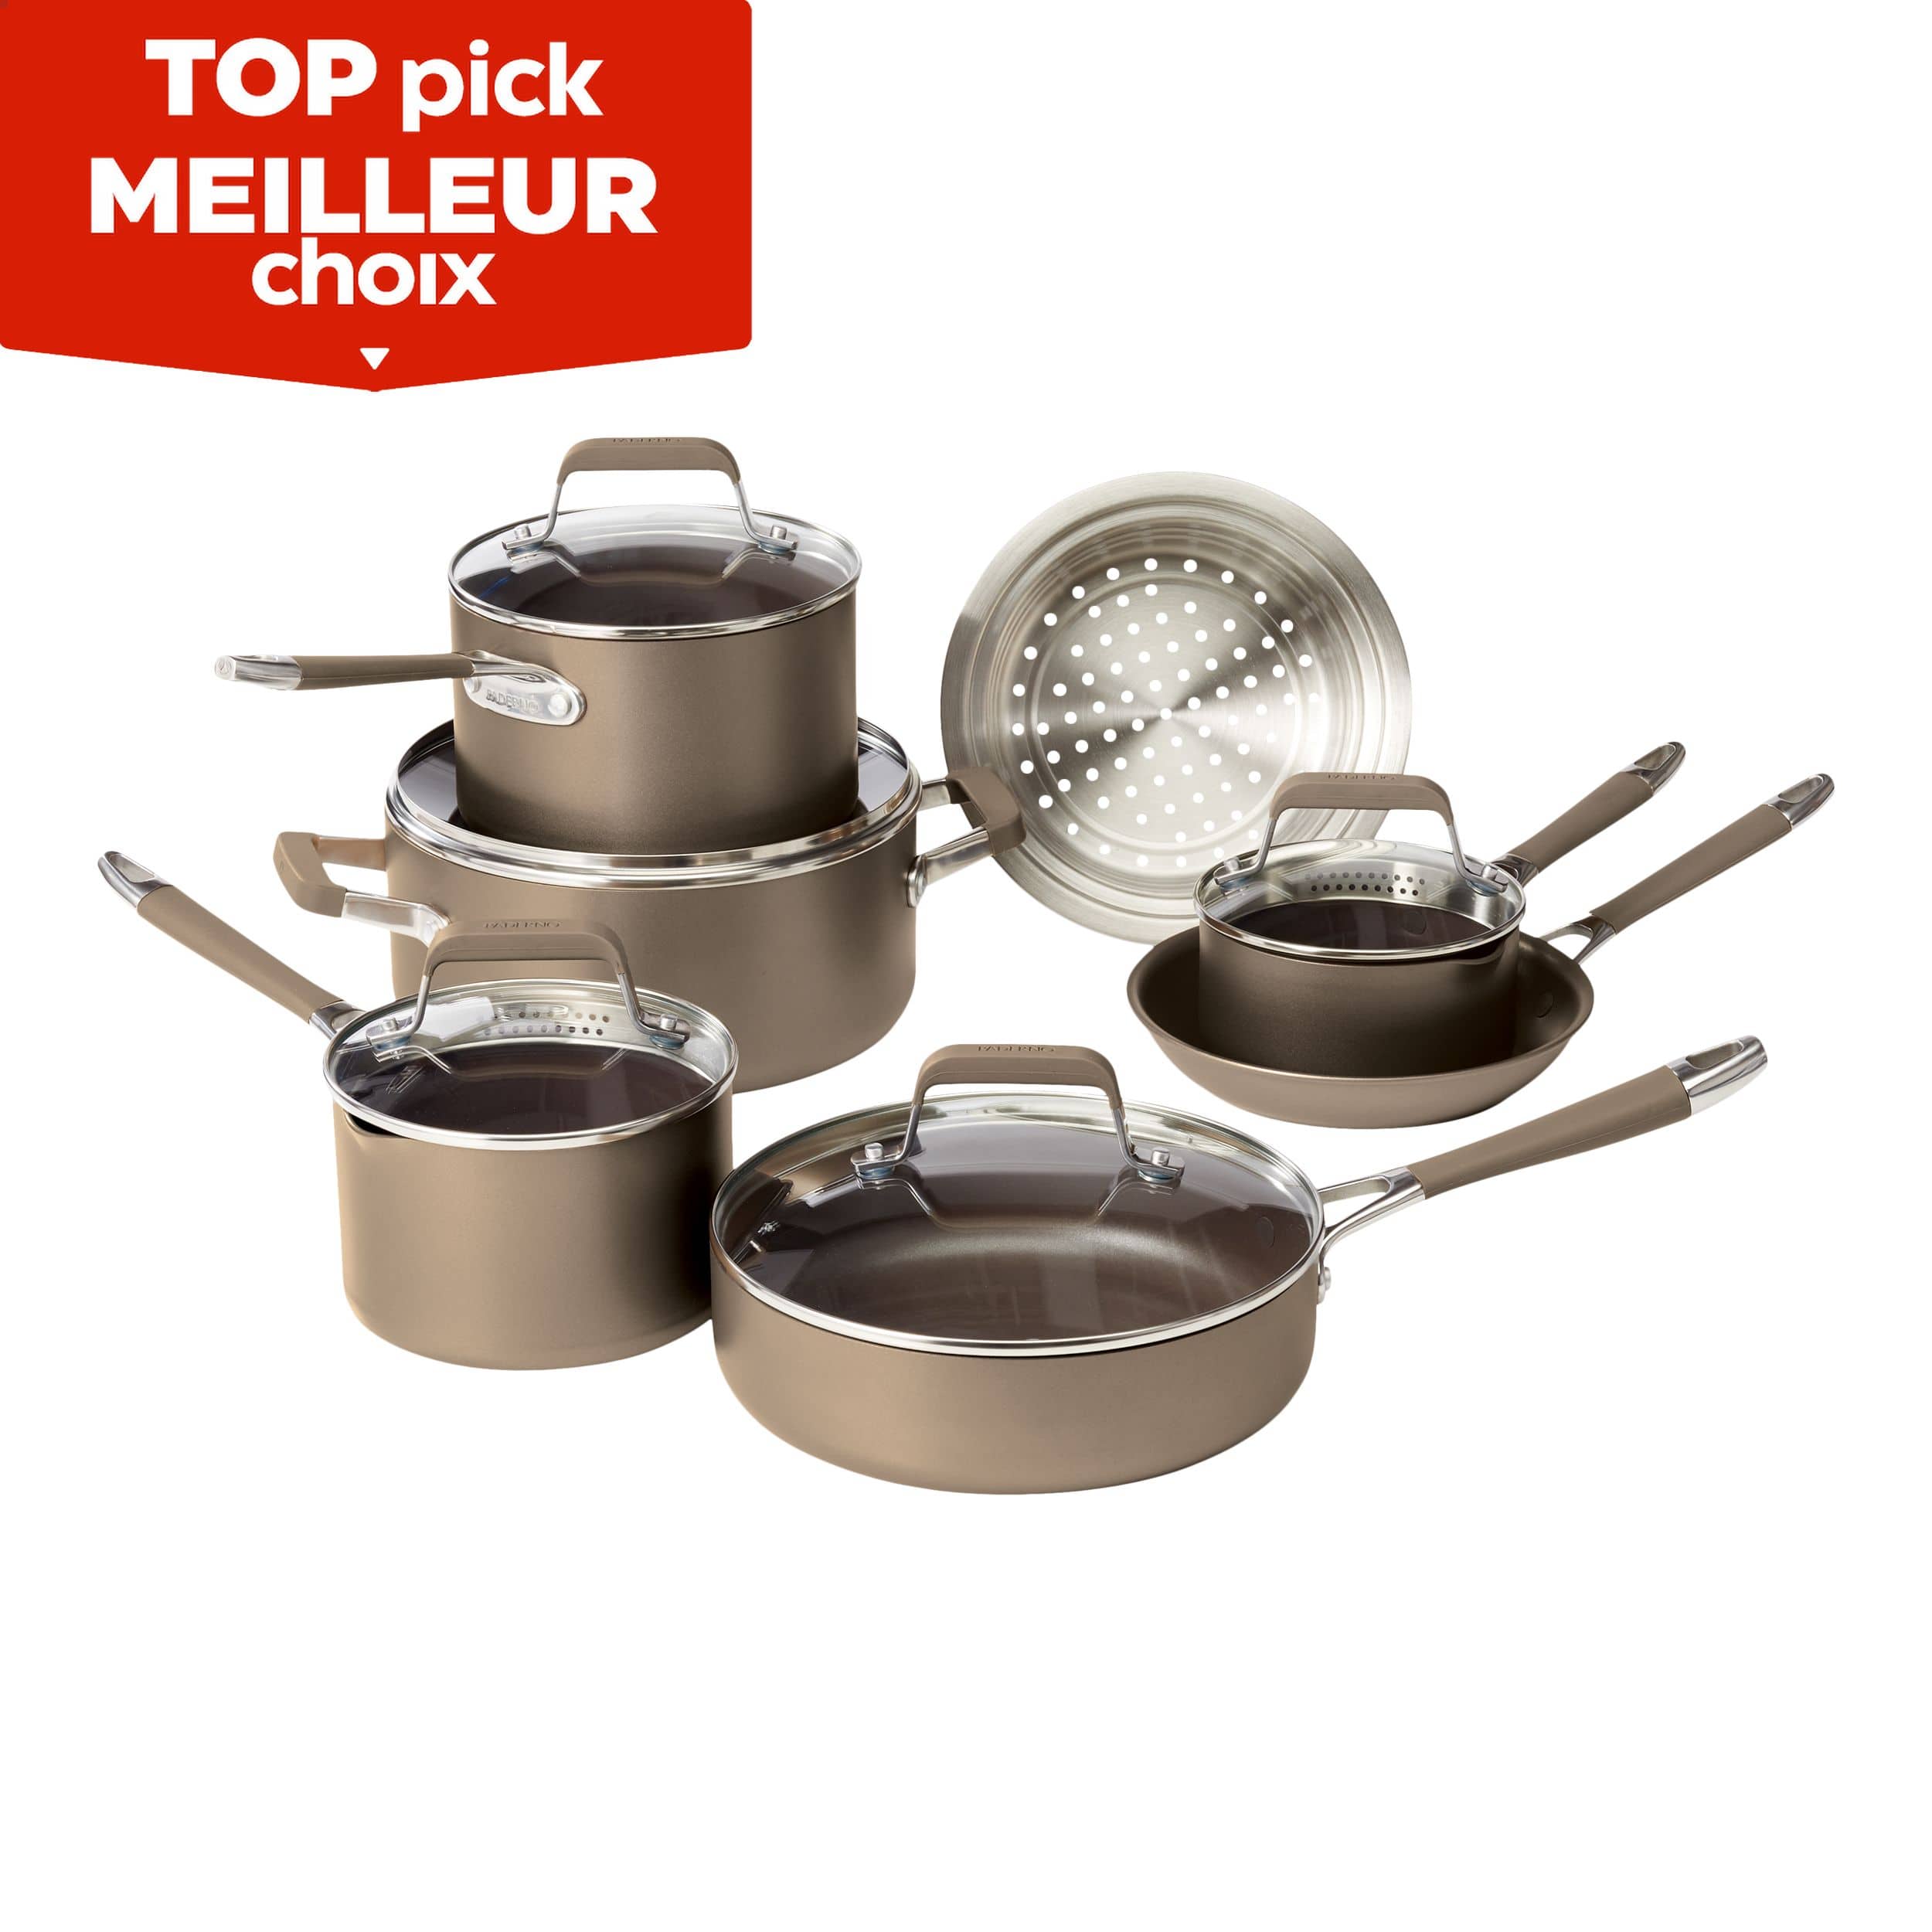 https://media-www.canadiantire.ca/product/living/kitchen/cookware/1425579/paderno-12pc-champagne-bronze-non-stick-cookware-set-4e040140-256b-497d-9d81-ec45fb85beab-jpgrendition.jpg